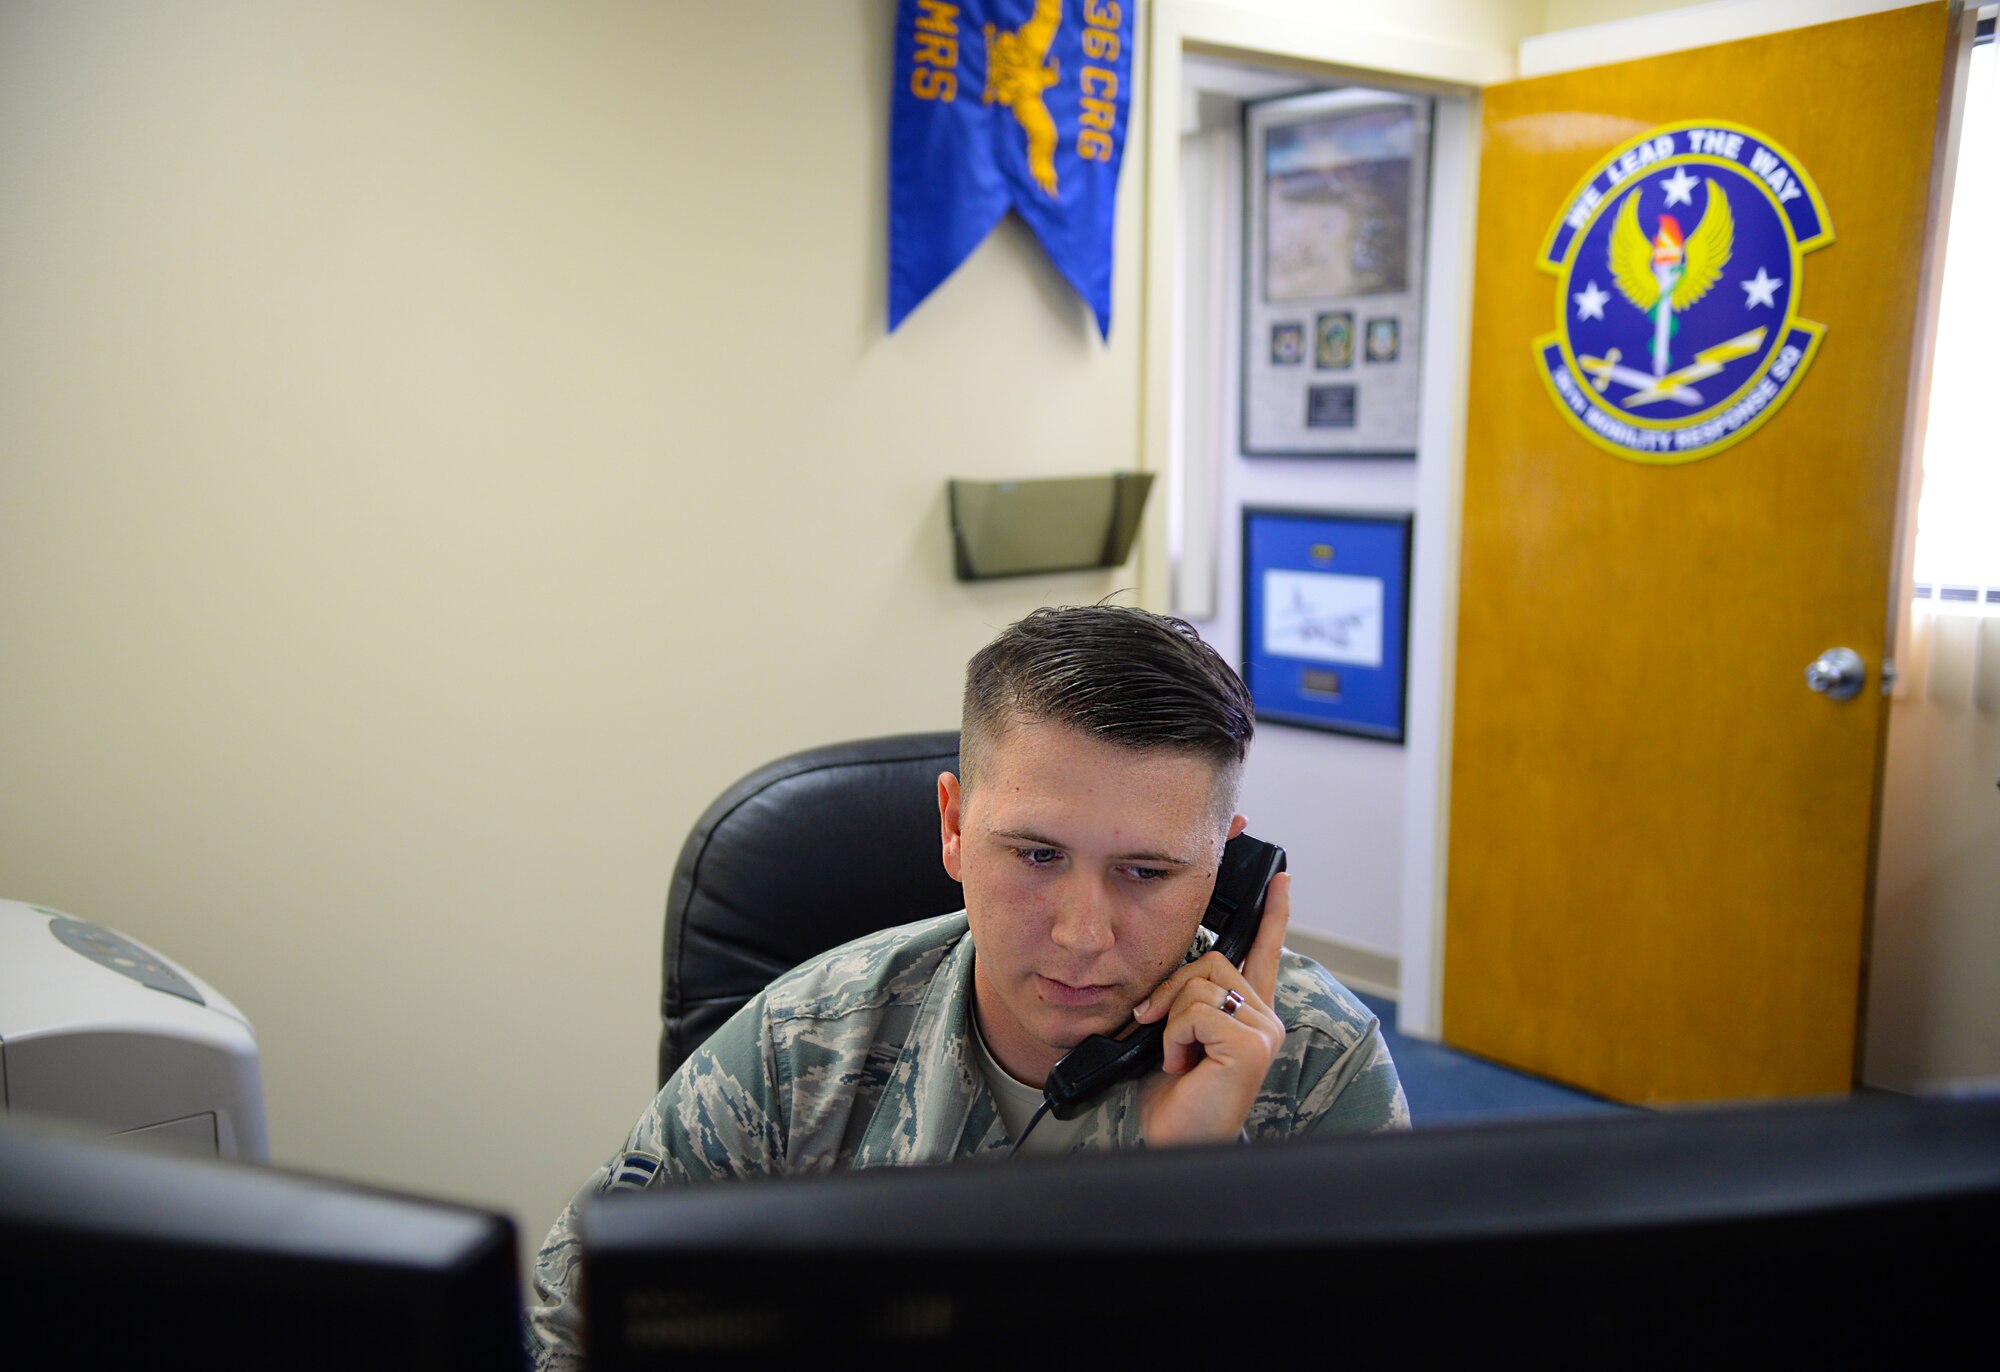 Senior Airman Presley Griffith, a command support staff executive assistant, works at his office in the 36th Mobility Response Squadron June 6, 2015, Andersen Air Force Base, Guam. Griffith created a free spring practice camp to offer local high school athletes an additional mentoring and practice opportunity before football season begins. (U.S. Air Force photo by Senior Airman Alexander W. Riedel/Released)